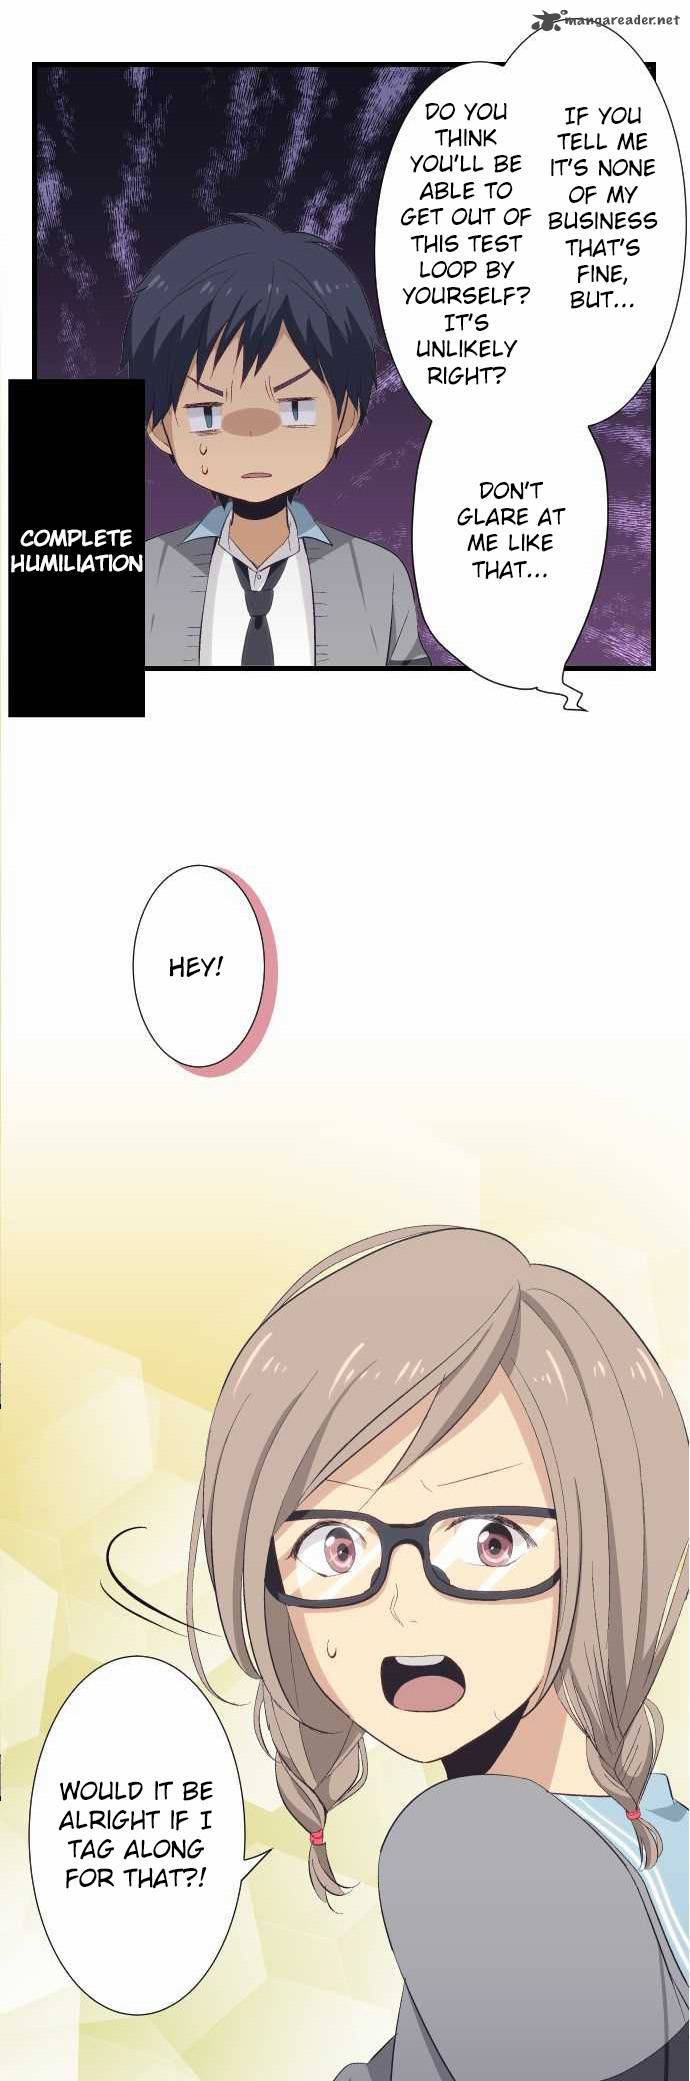 Relife 21 15